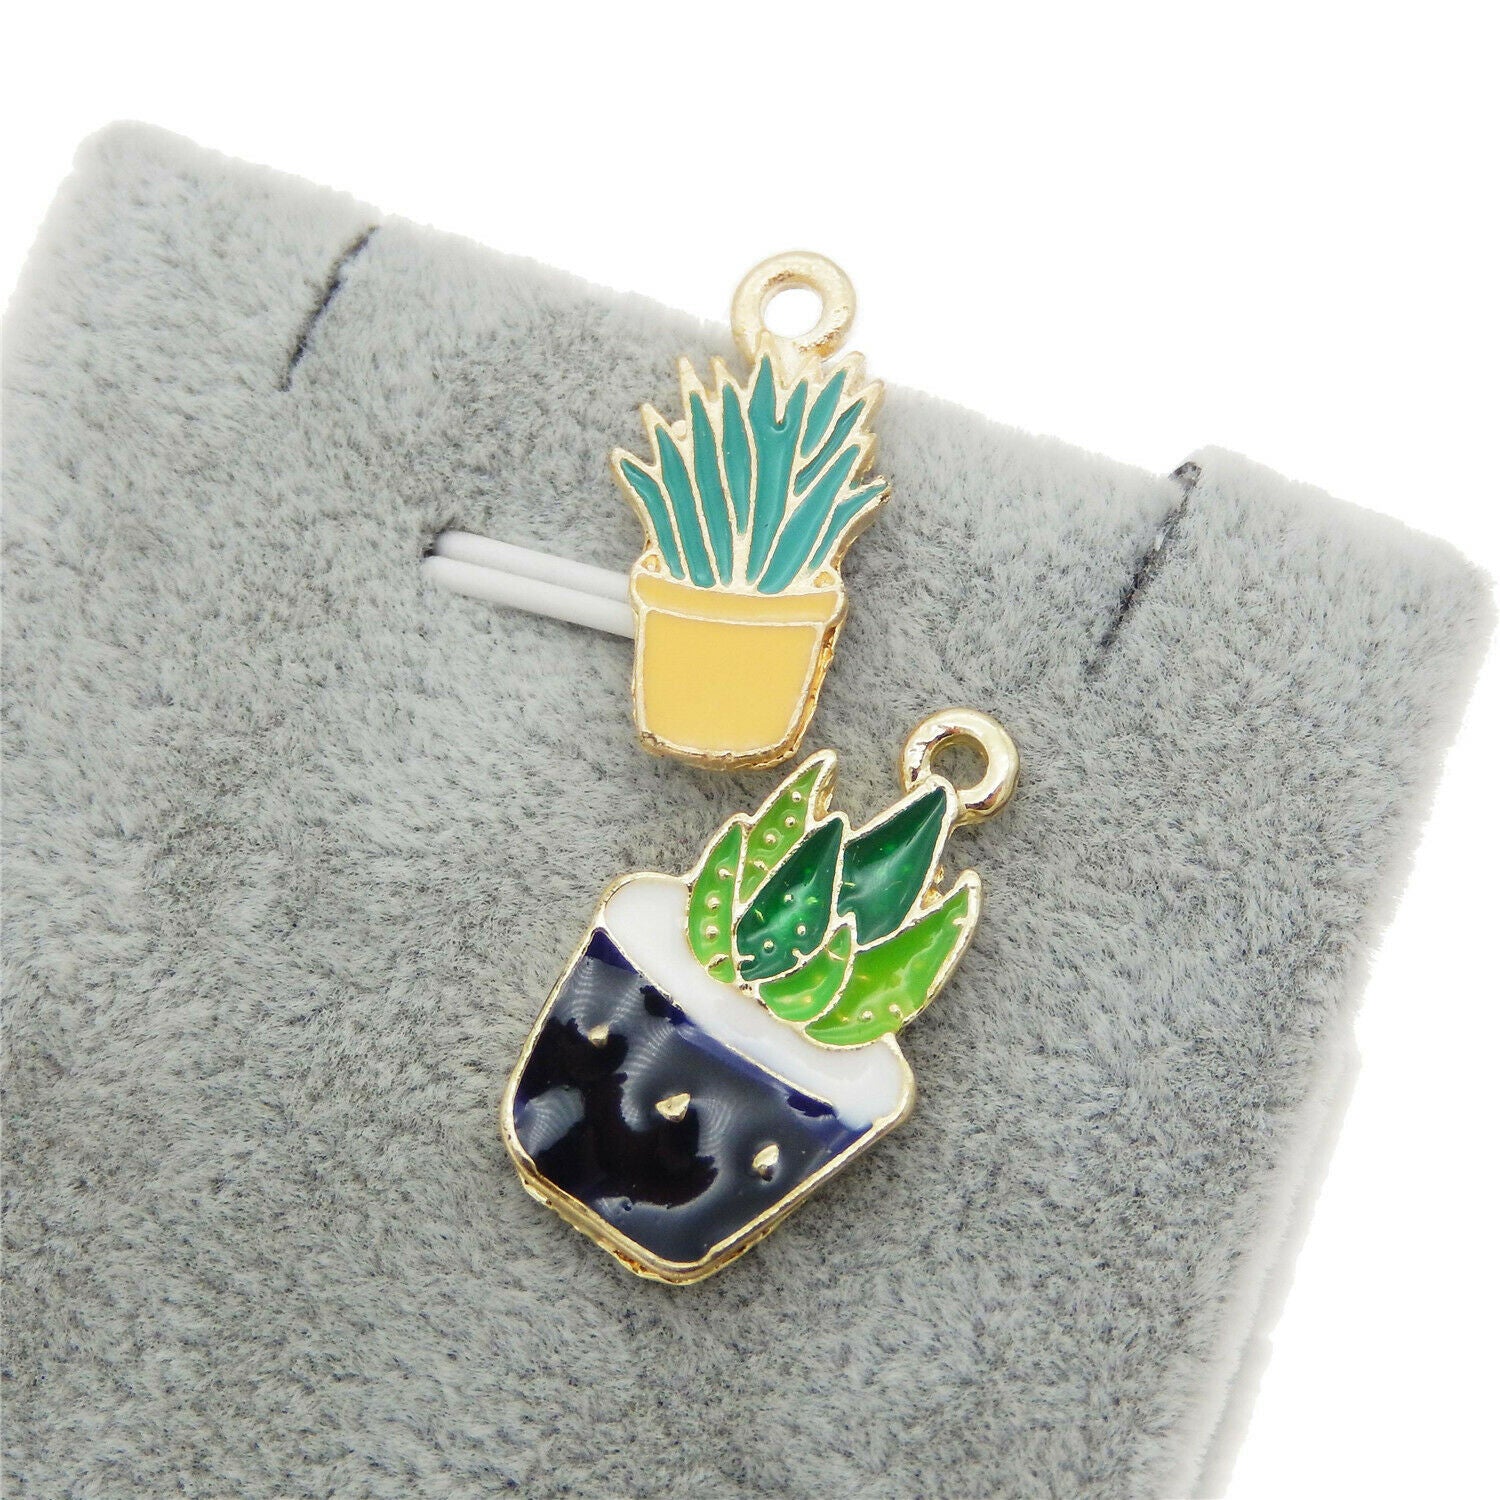 10 pcs Mixed Cactus Potted Plants Charms Enamel Plated Earring Pendant Findings